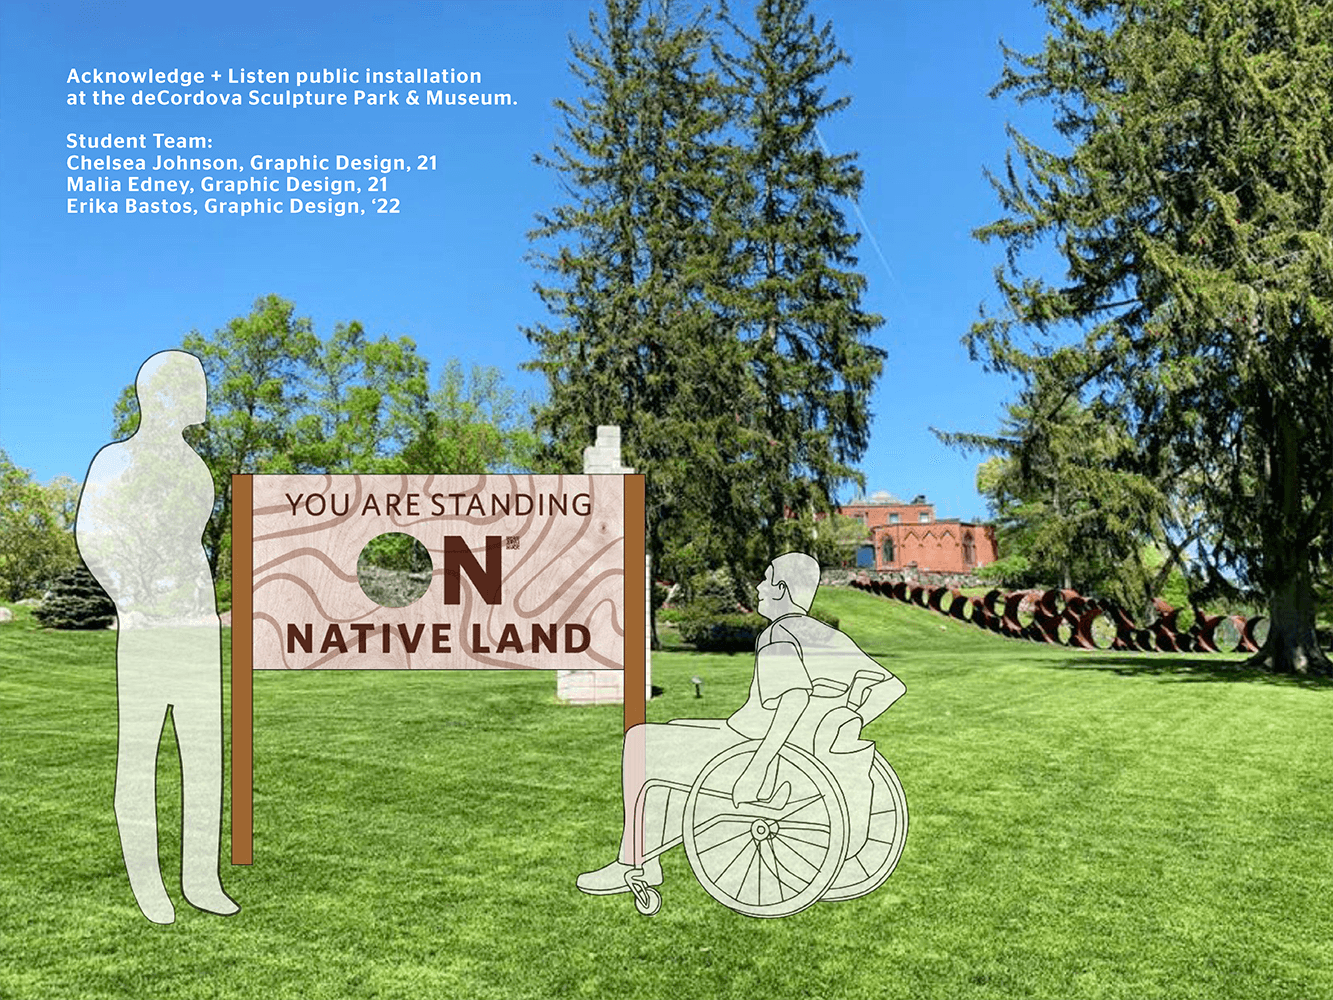 Digital illustration of a wooden sign in a grassy field surrounded by trees. Transparent illustrations of a person standing and a person in a wheelchair look at the sign that reads "You Are Standing On Native Land." The "O" of "On" is cut out revealing the landscape. Caption reads "Acknowledge + Listen public installation at the deCordova Sculpture Park & Museum. Student Team: Chelsea Johnson, Graphic Design, 21; Malia Edney, Graphic Design, 21; Erika Bastos, Graphic Design, '22." 